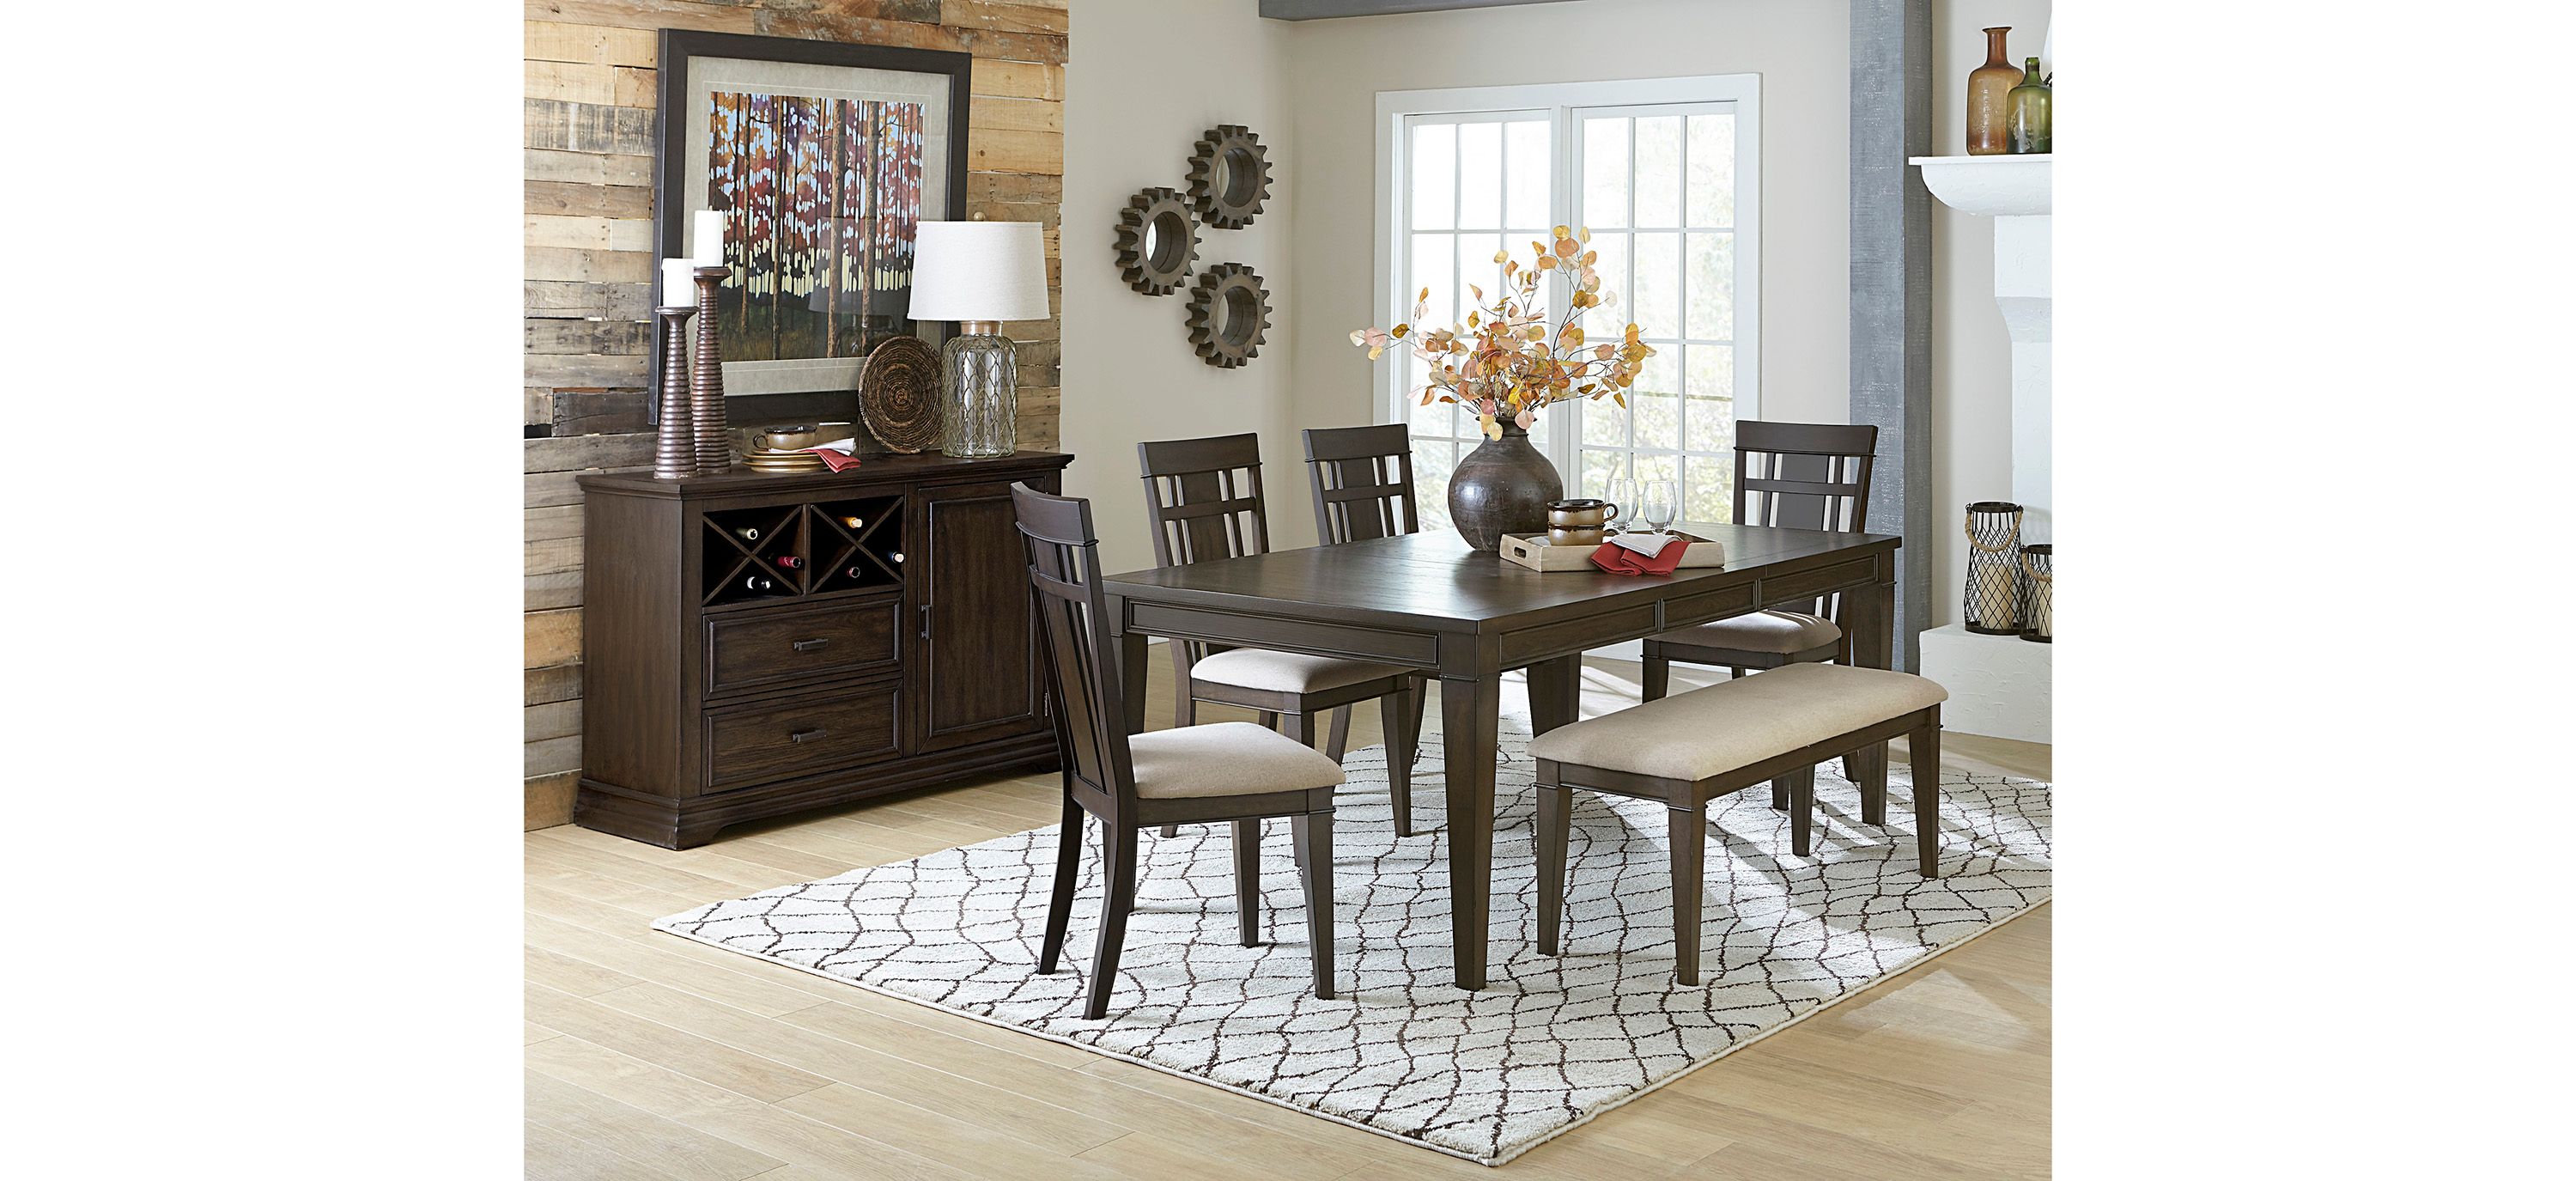 Becher 6-pc. Dining Set with Bench